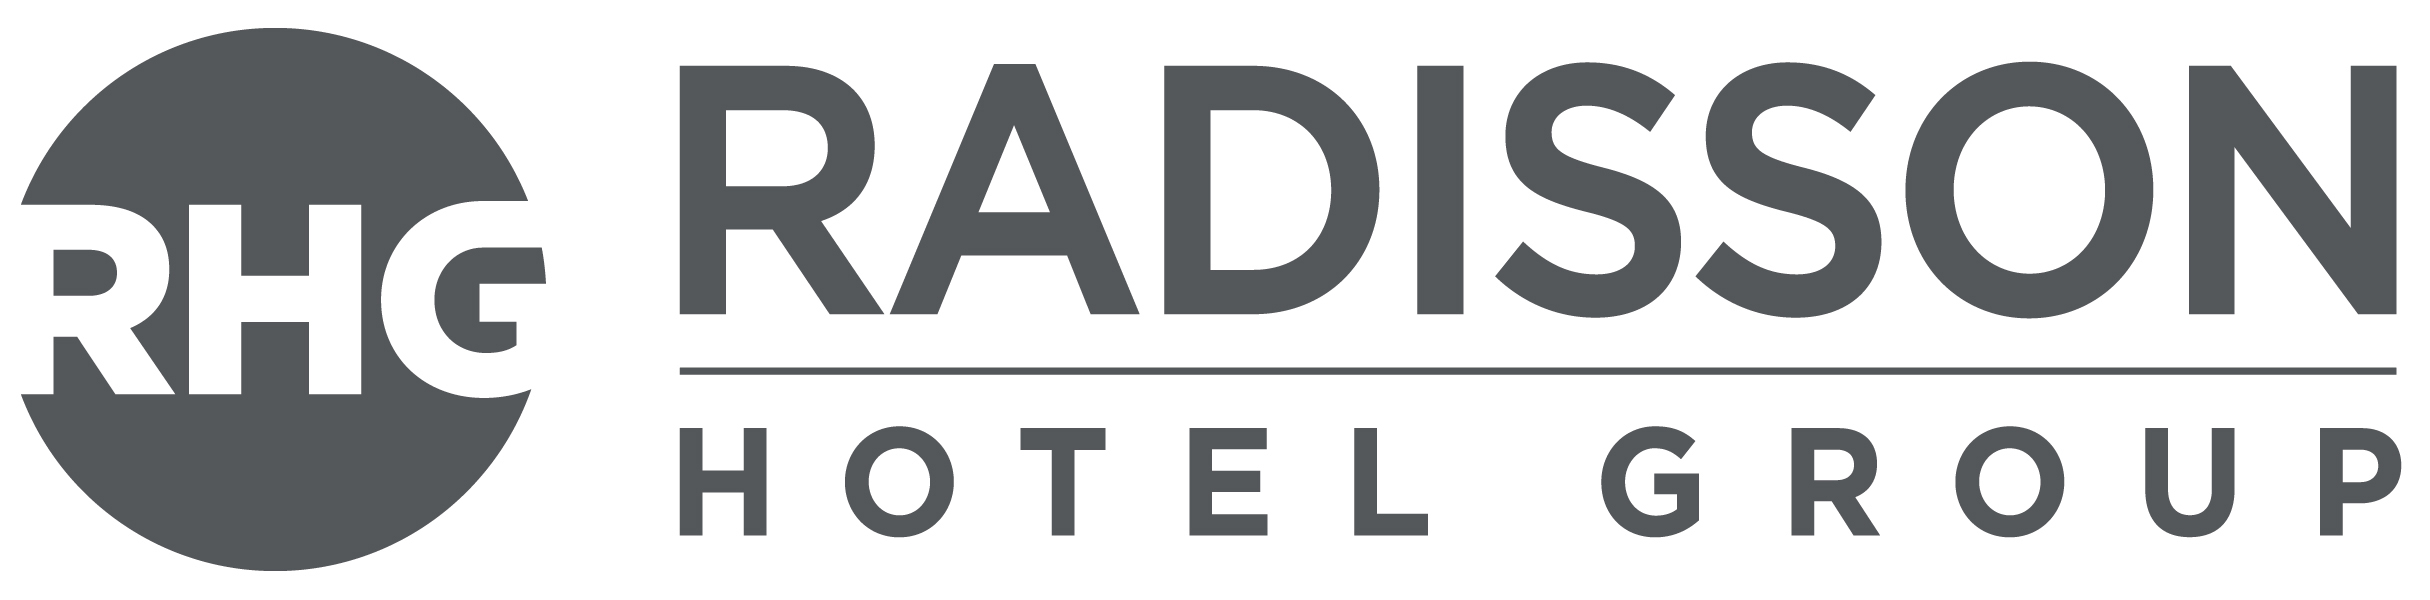 Radisson Hotel Group continues to strengthen its presence in Africa